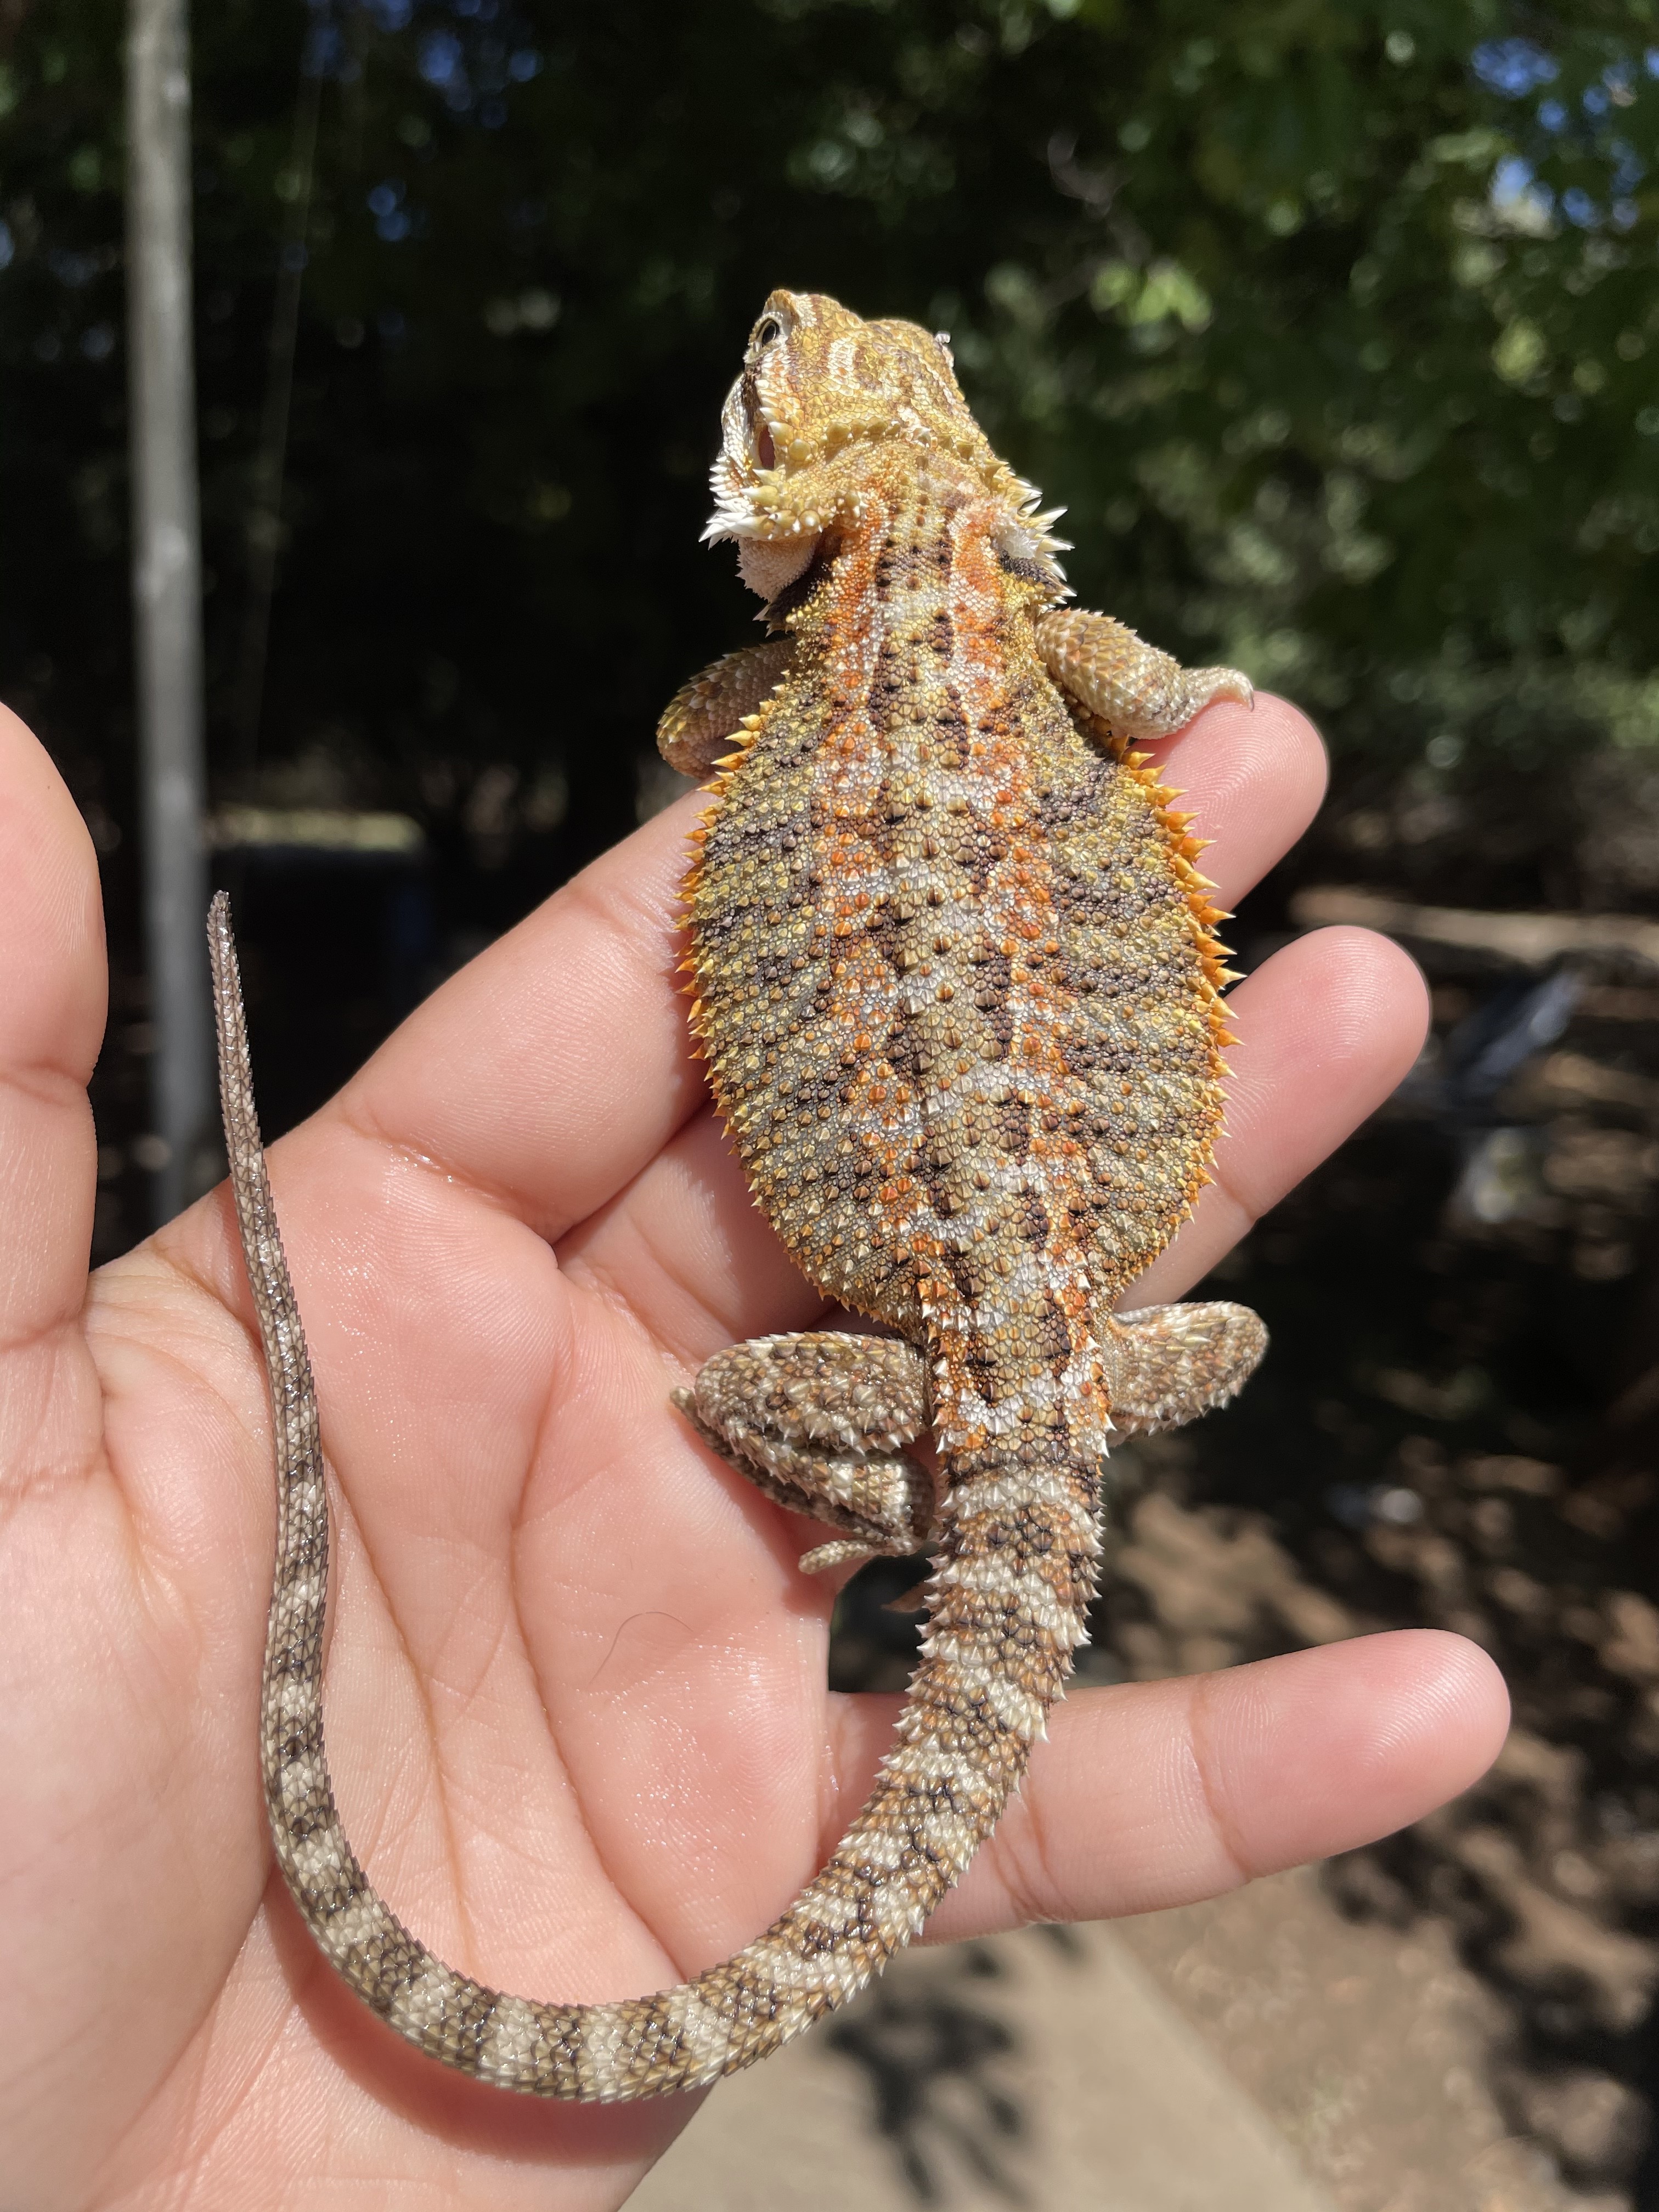 Normal Central Bearded Dragon by Killer Clutches